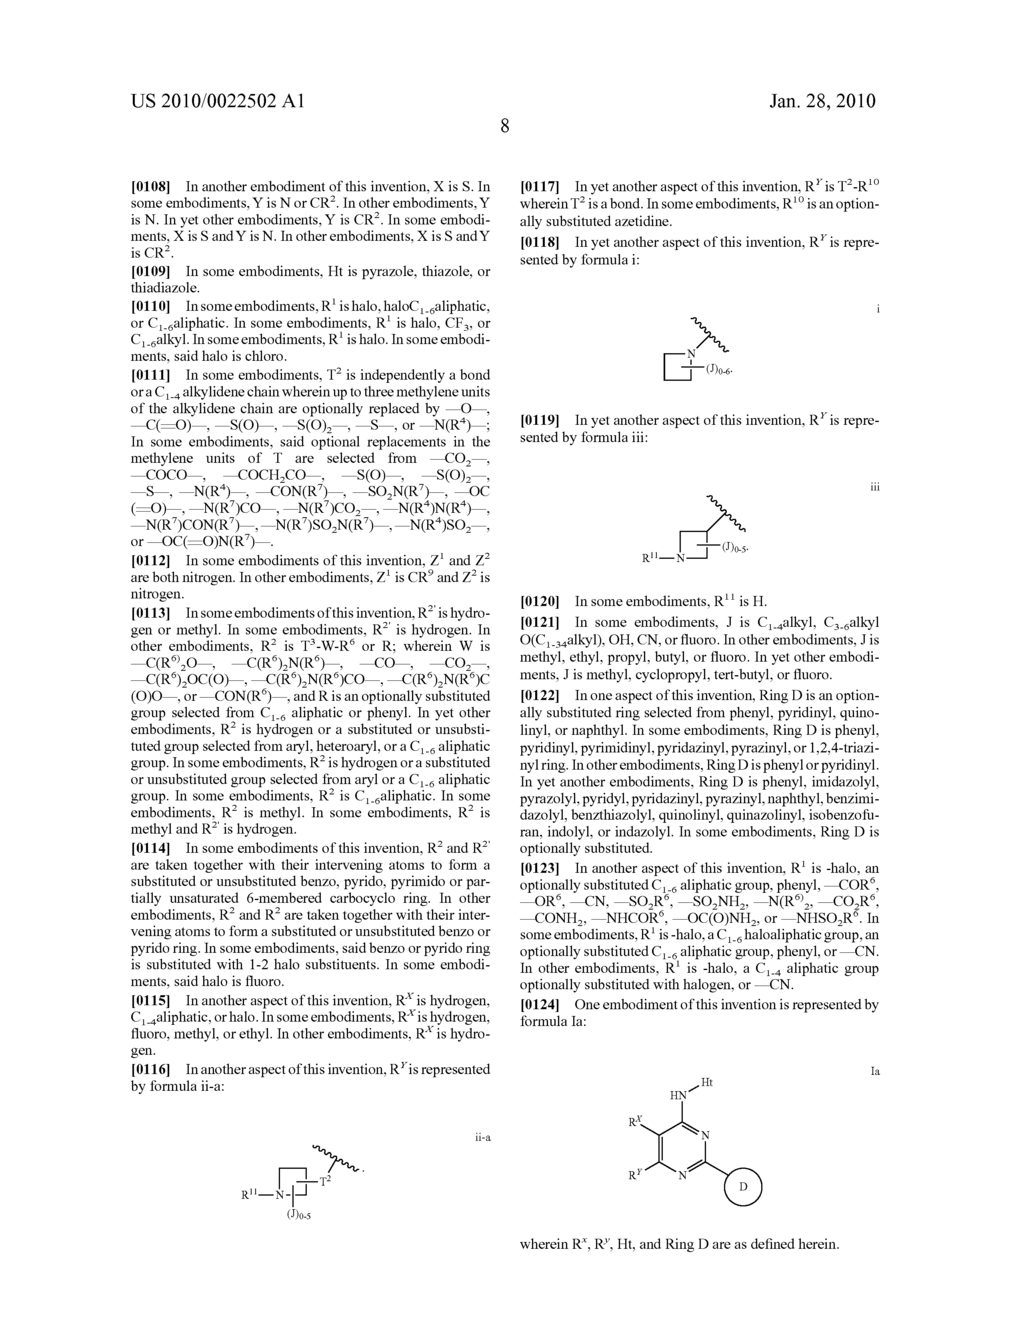 AMINOPYRIDINES AND AMINOPYRIMIDINES USEFUL AS INHIBITORS OF PROTEIN KINASES - diagram, schematic, and image 09